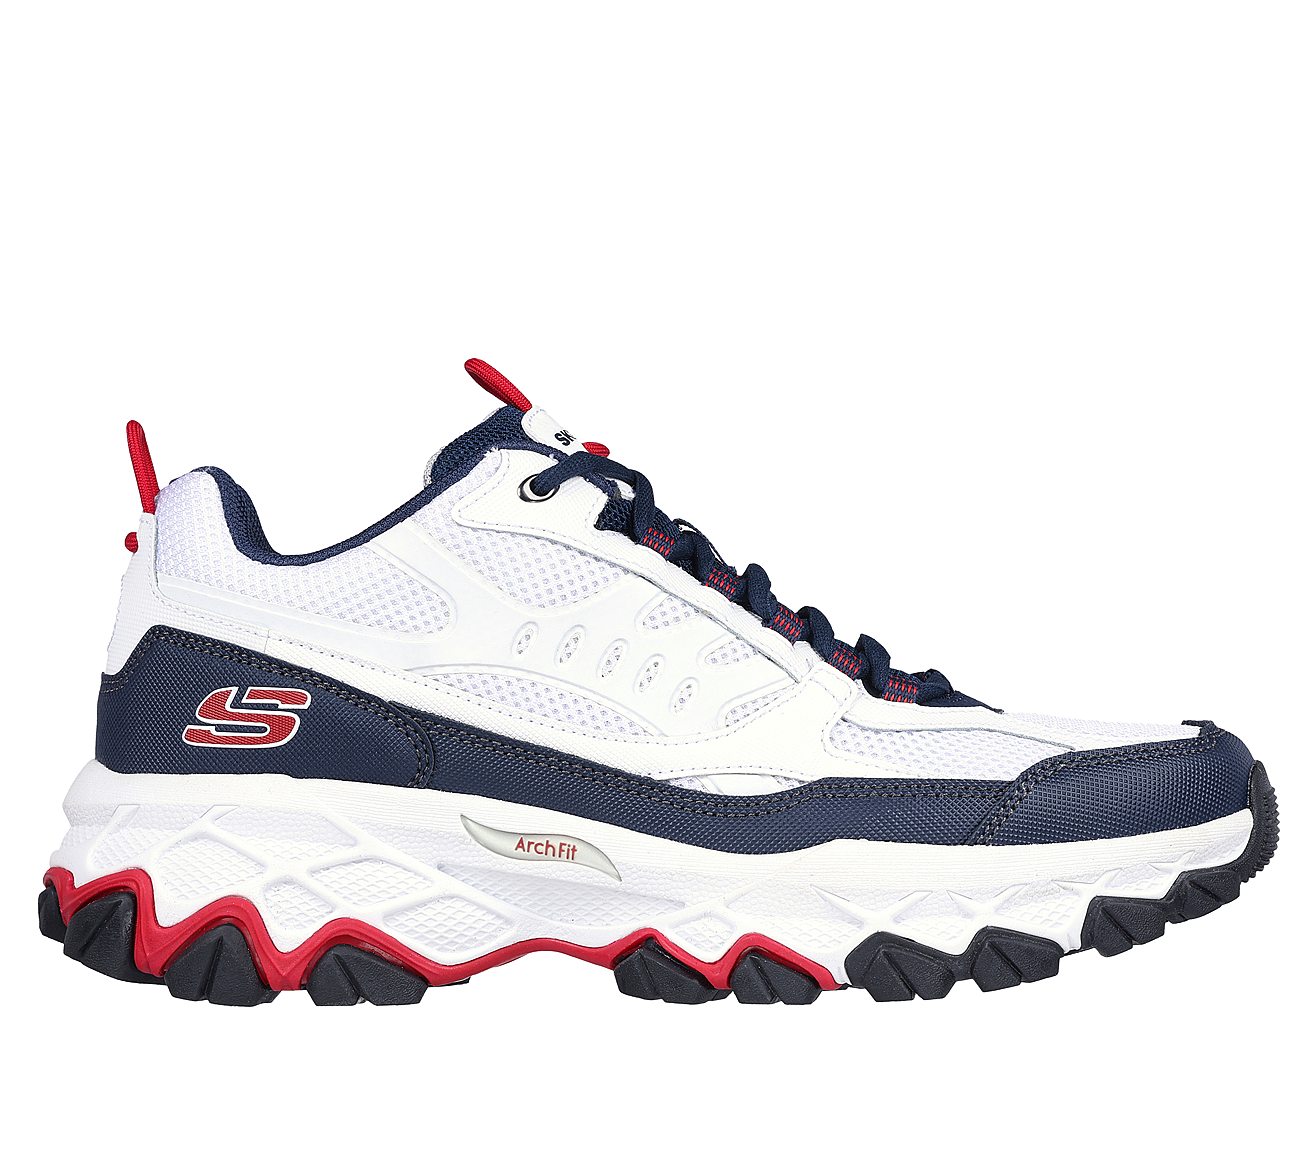 ARCH FIT AKHIDIME, WHITE/NAVY/RED Footwear Lateral View